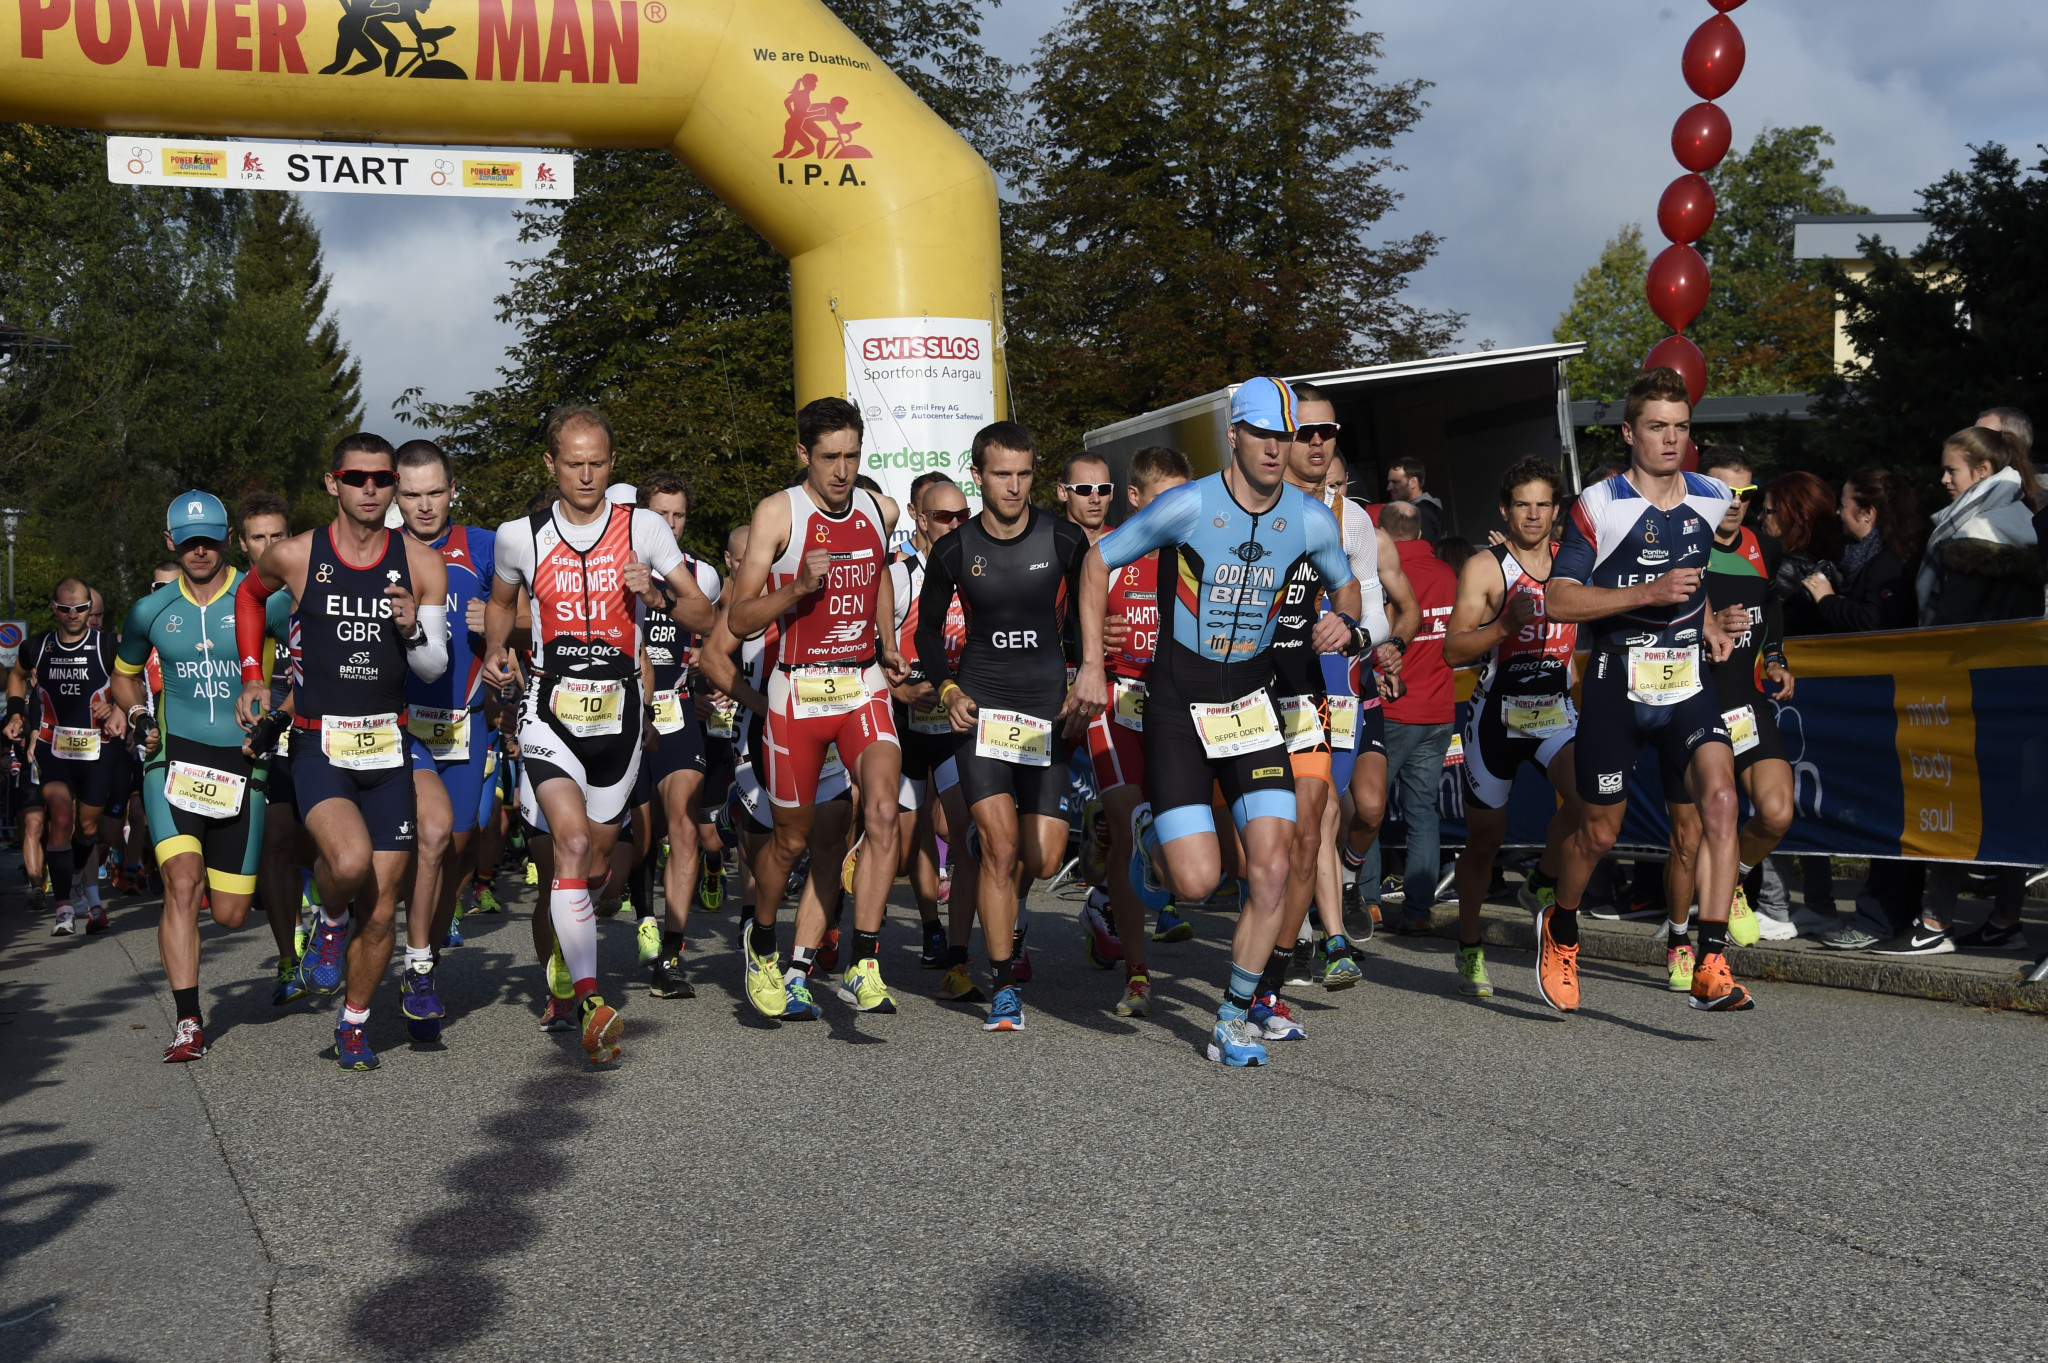 Zofingen to host Long Distance Duathlon World Championships for 10th consecutive year